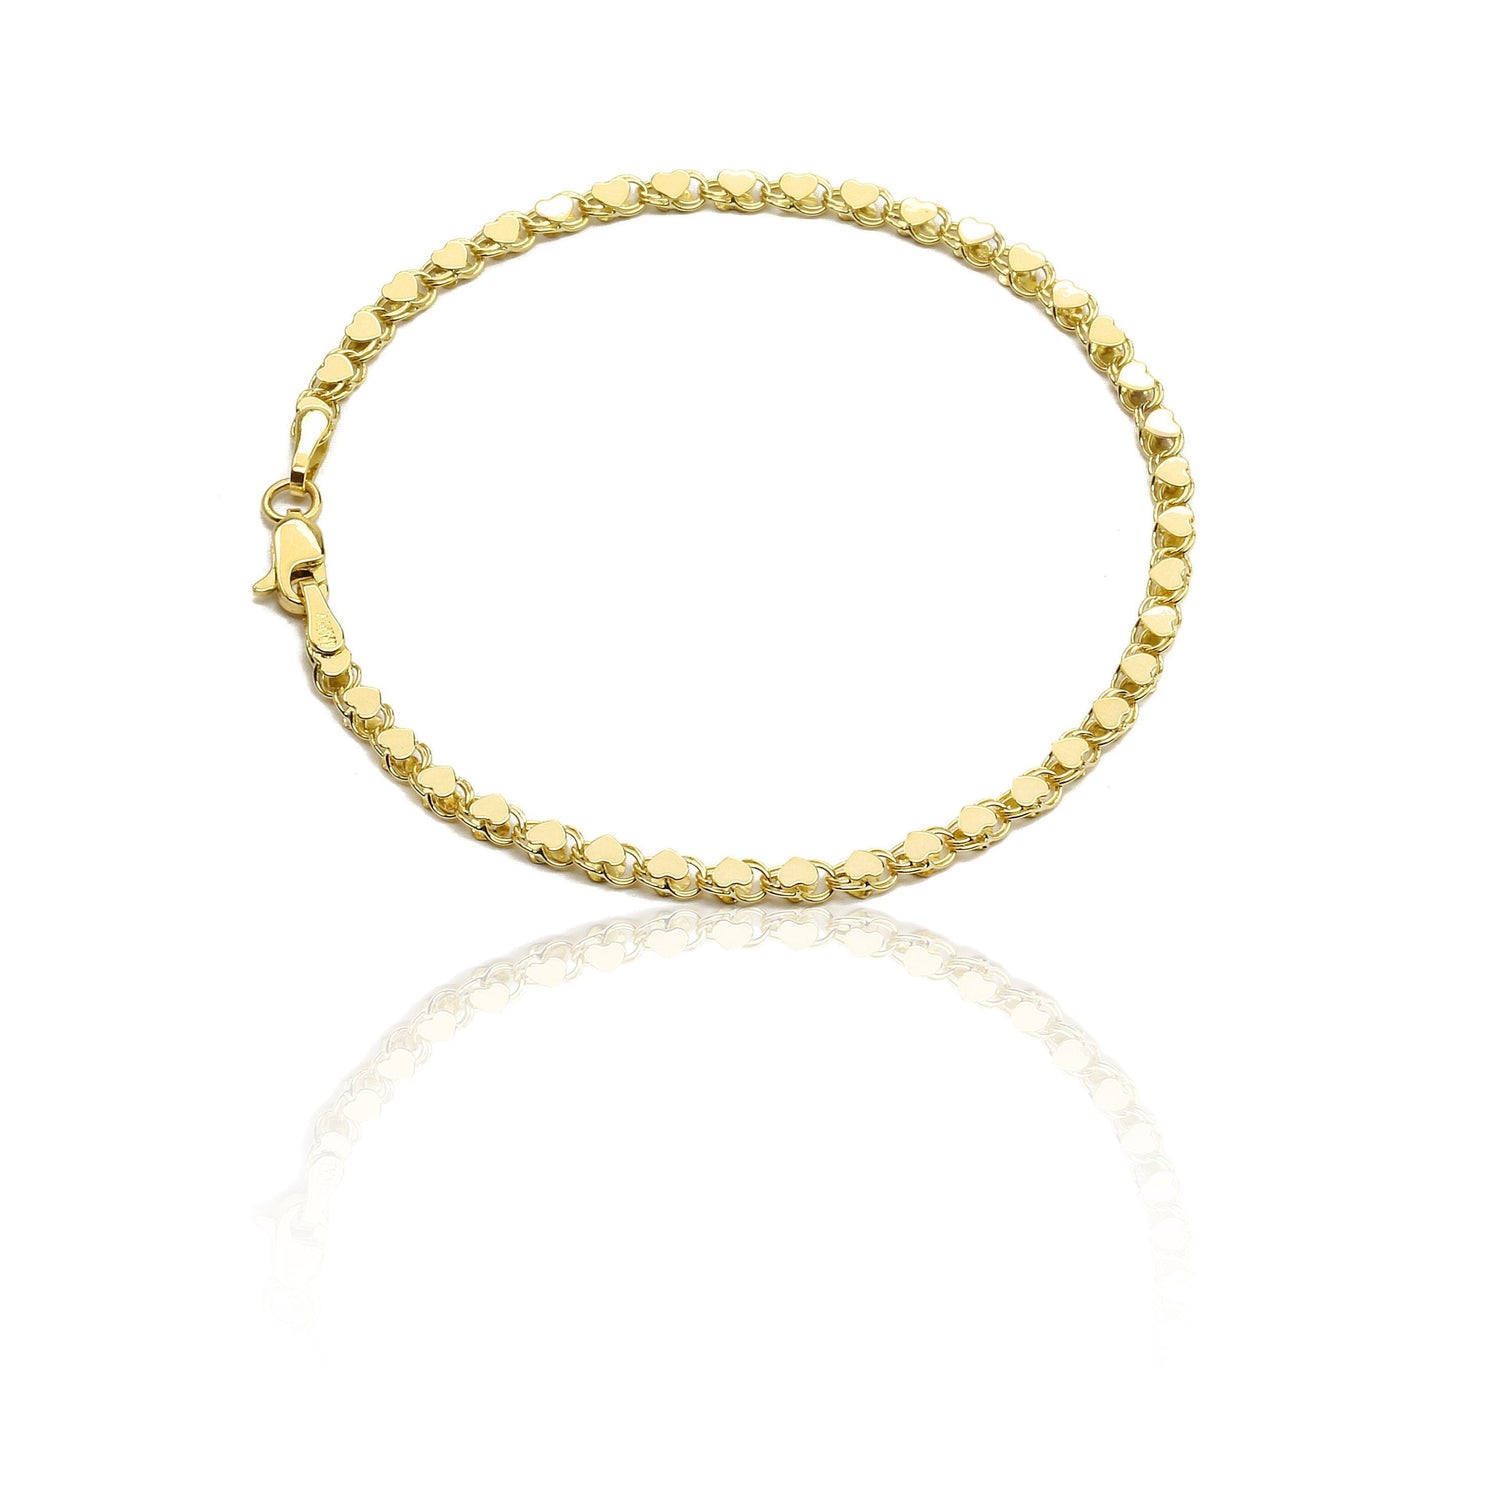 10k Yellow Gold Friendship Mirror Heart Chain Bracelet and Anklet (0.12